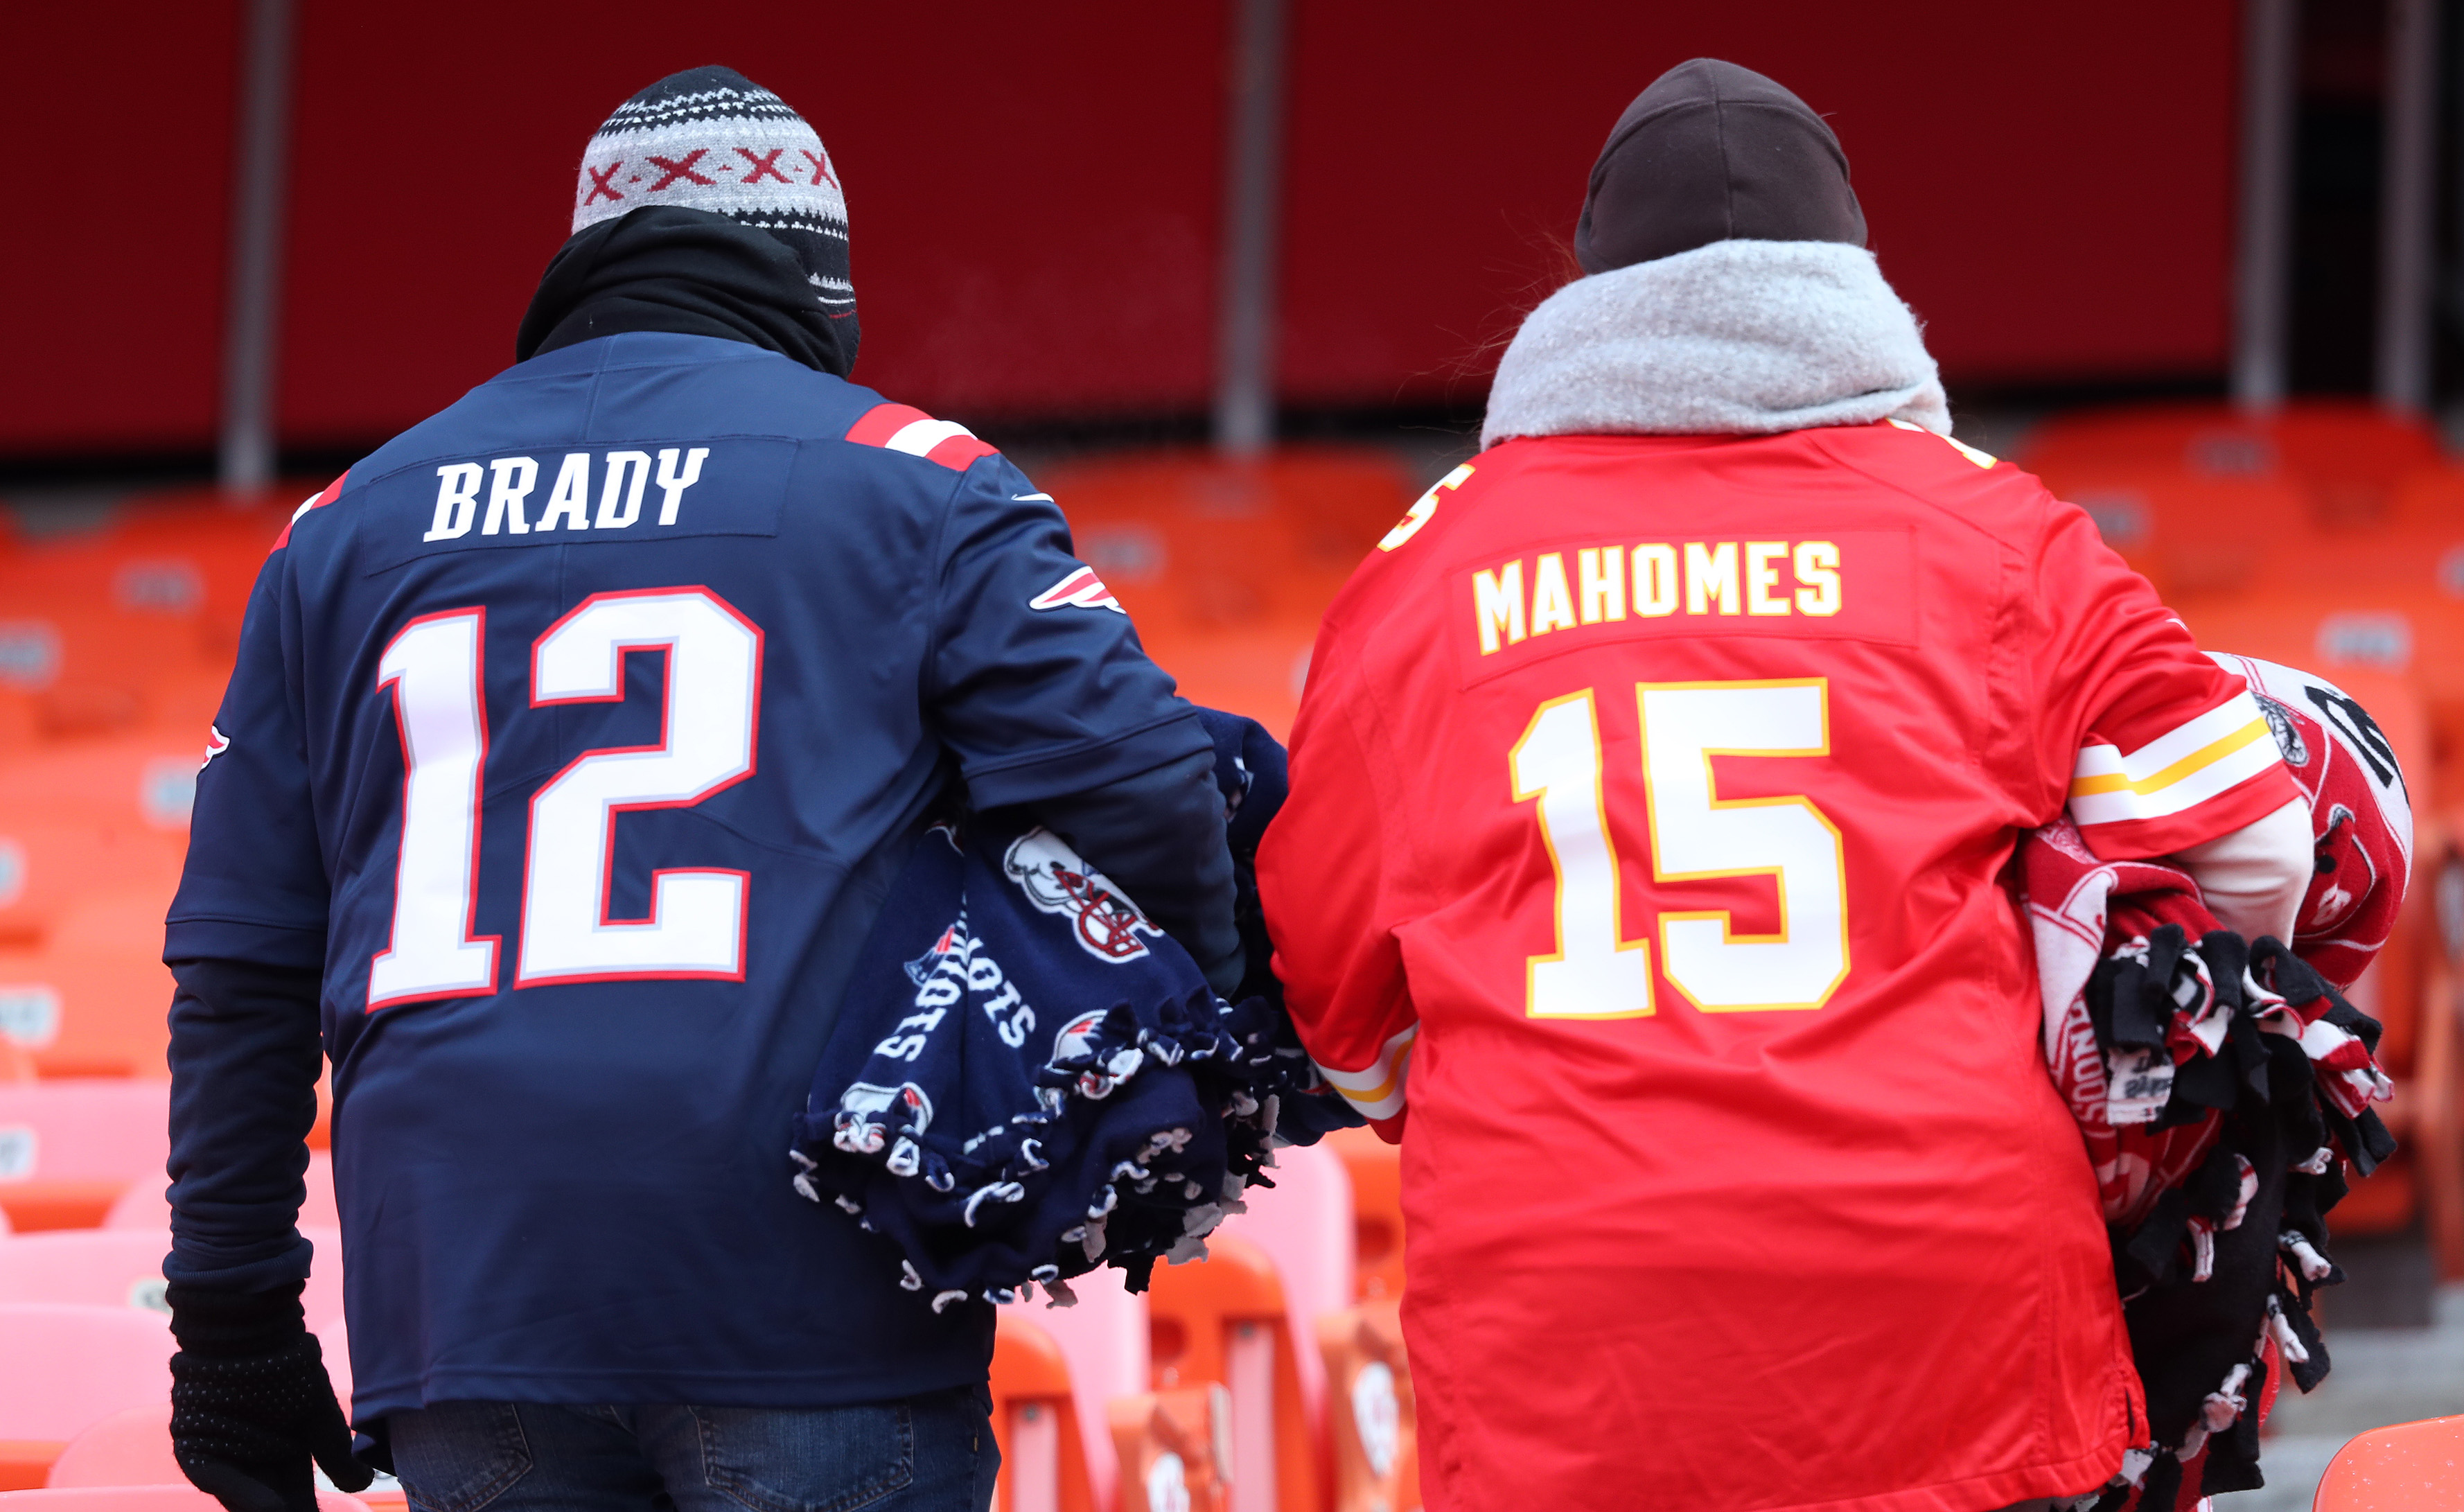 Is America Rooting For Brady or Mahomes to Win Super Bowl LV?